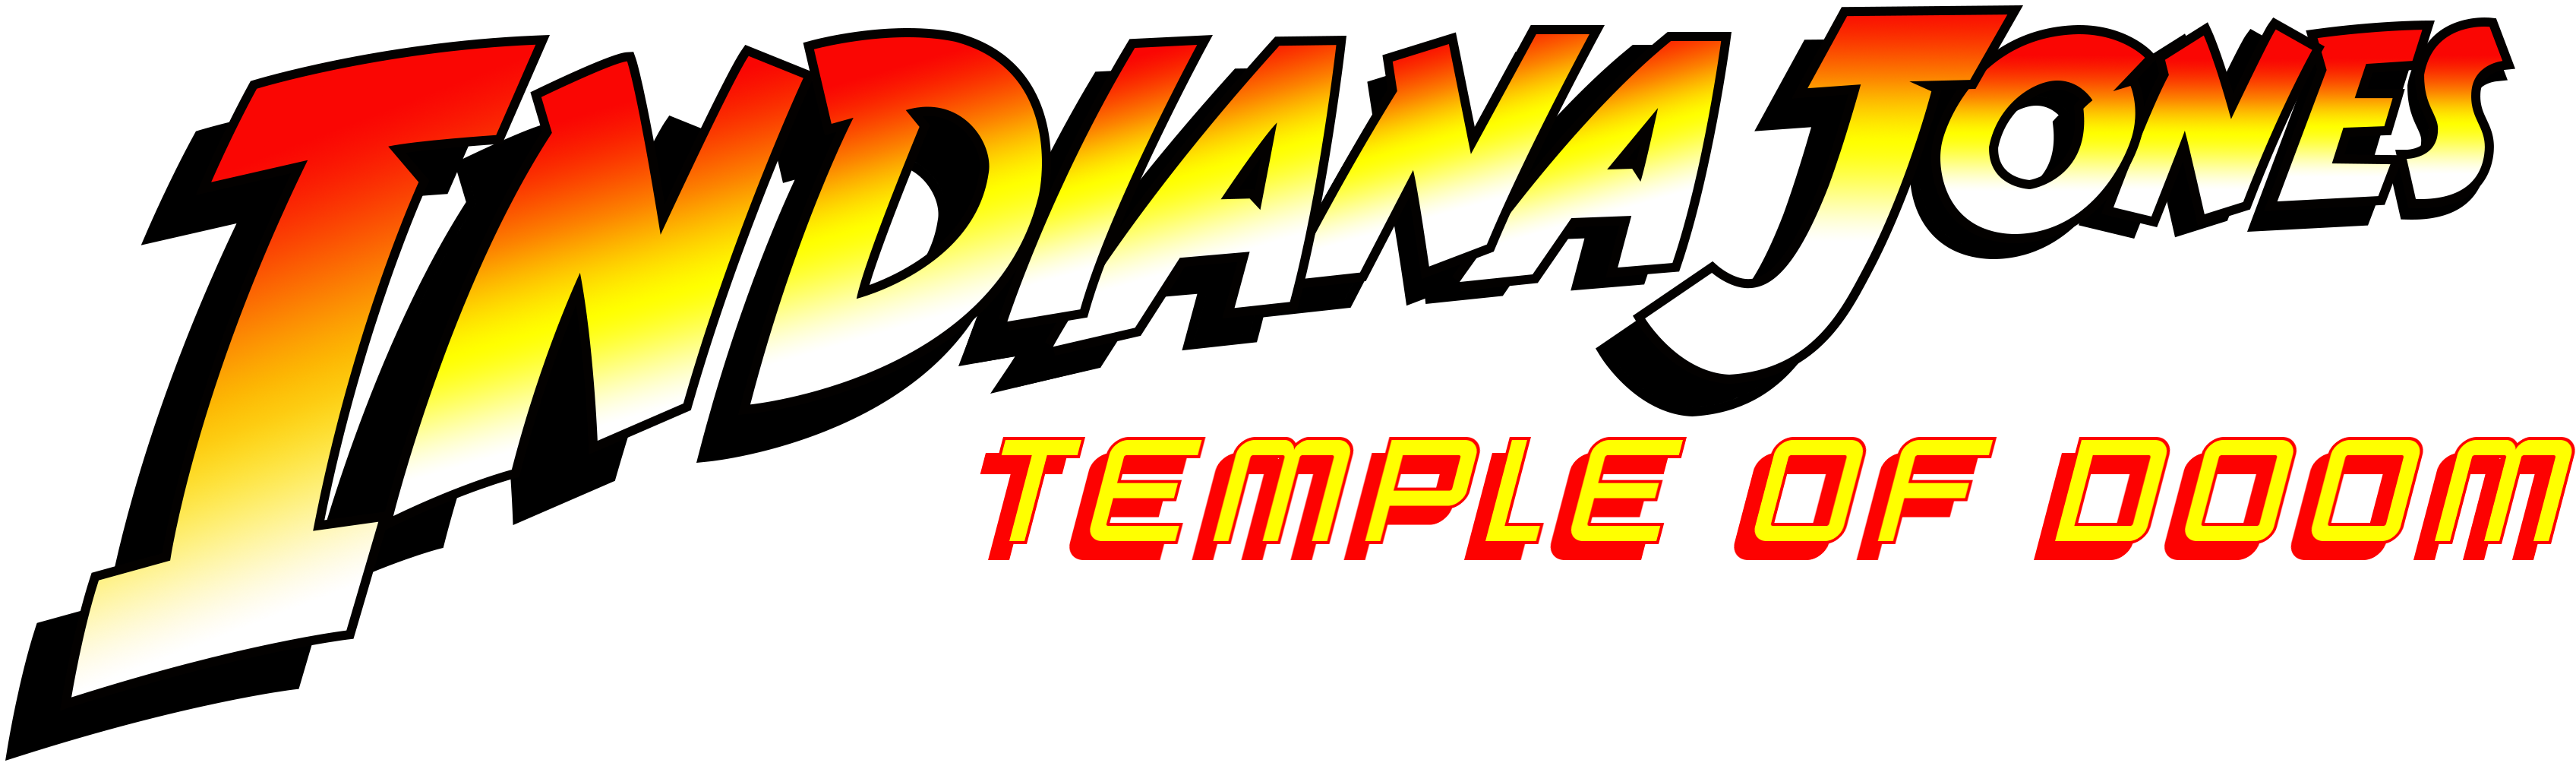 Indiana Jones And The Temple Of Doom Images LaunchBox Games Database